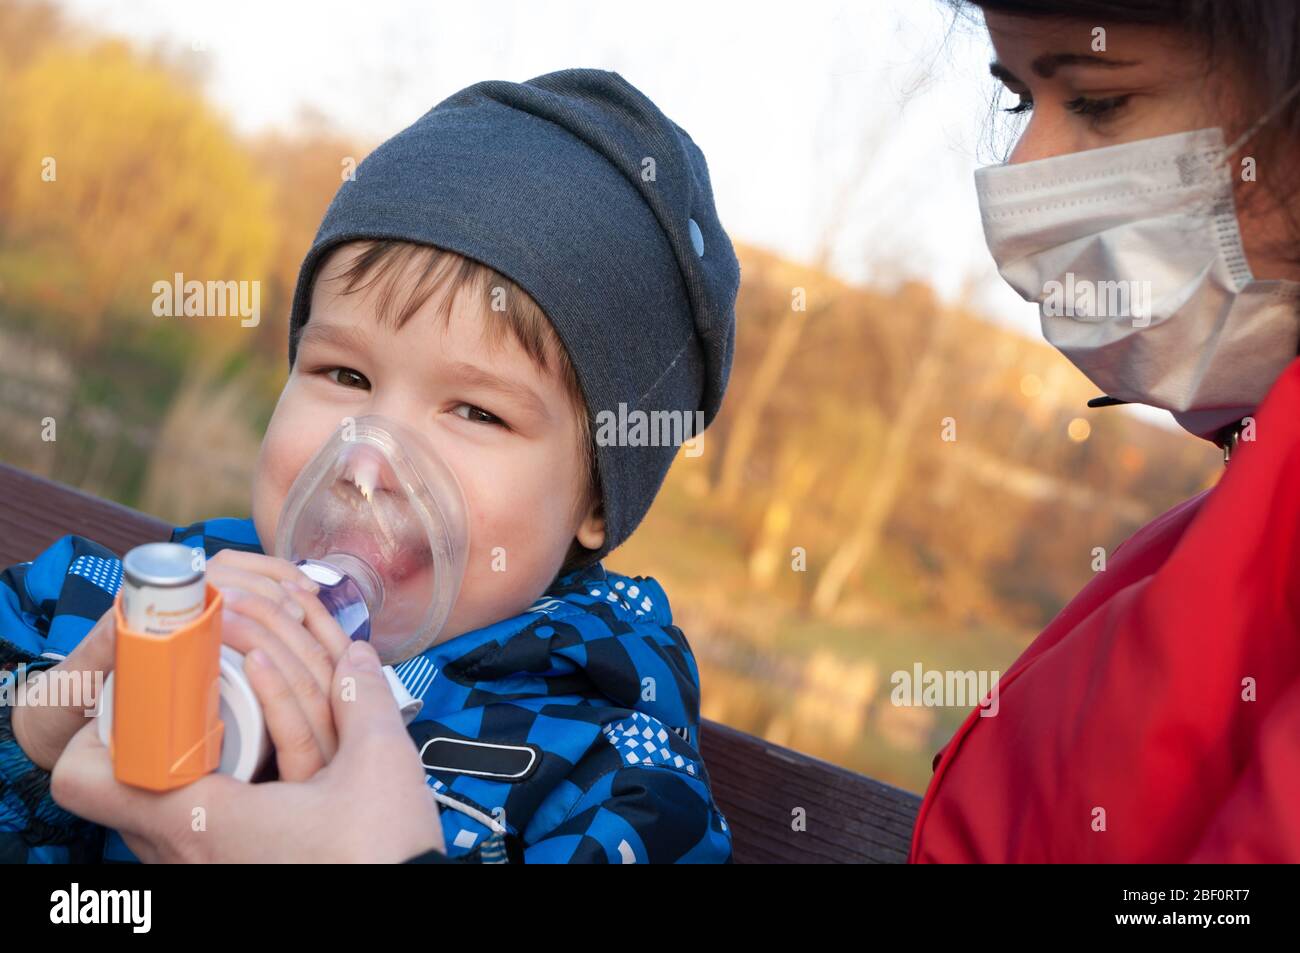 A small boy who suffering from illness bronchial asthma getting treatment with aerosol inhaler. Prevention of complications Stock Photo